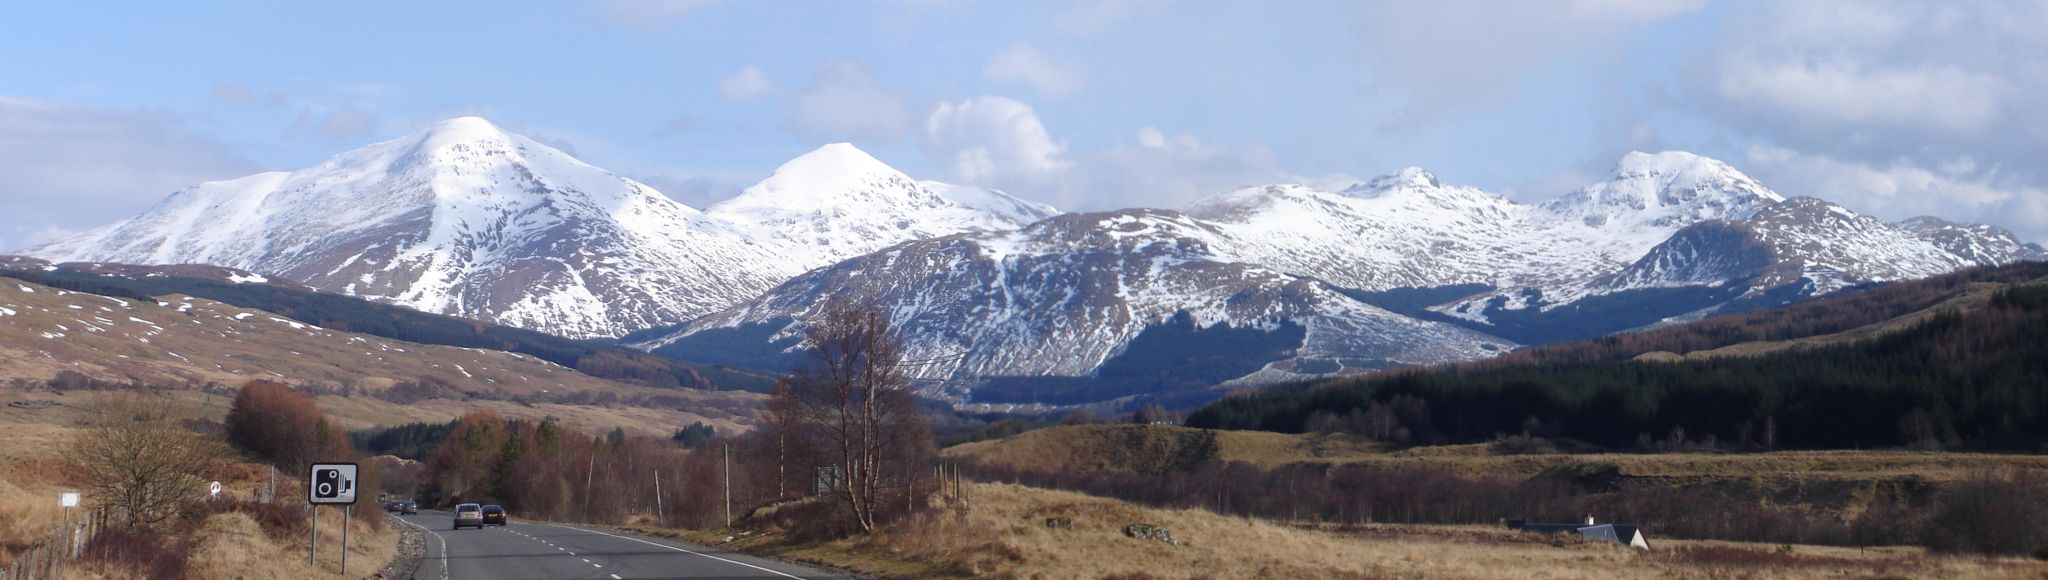 Ben More & Stob Binnein and Stob Garbh & Cruach Ardrain from West Highland Way on the approach to Tyndrum